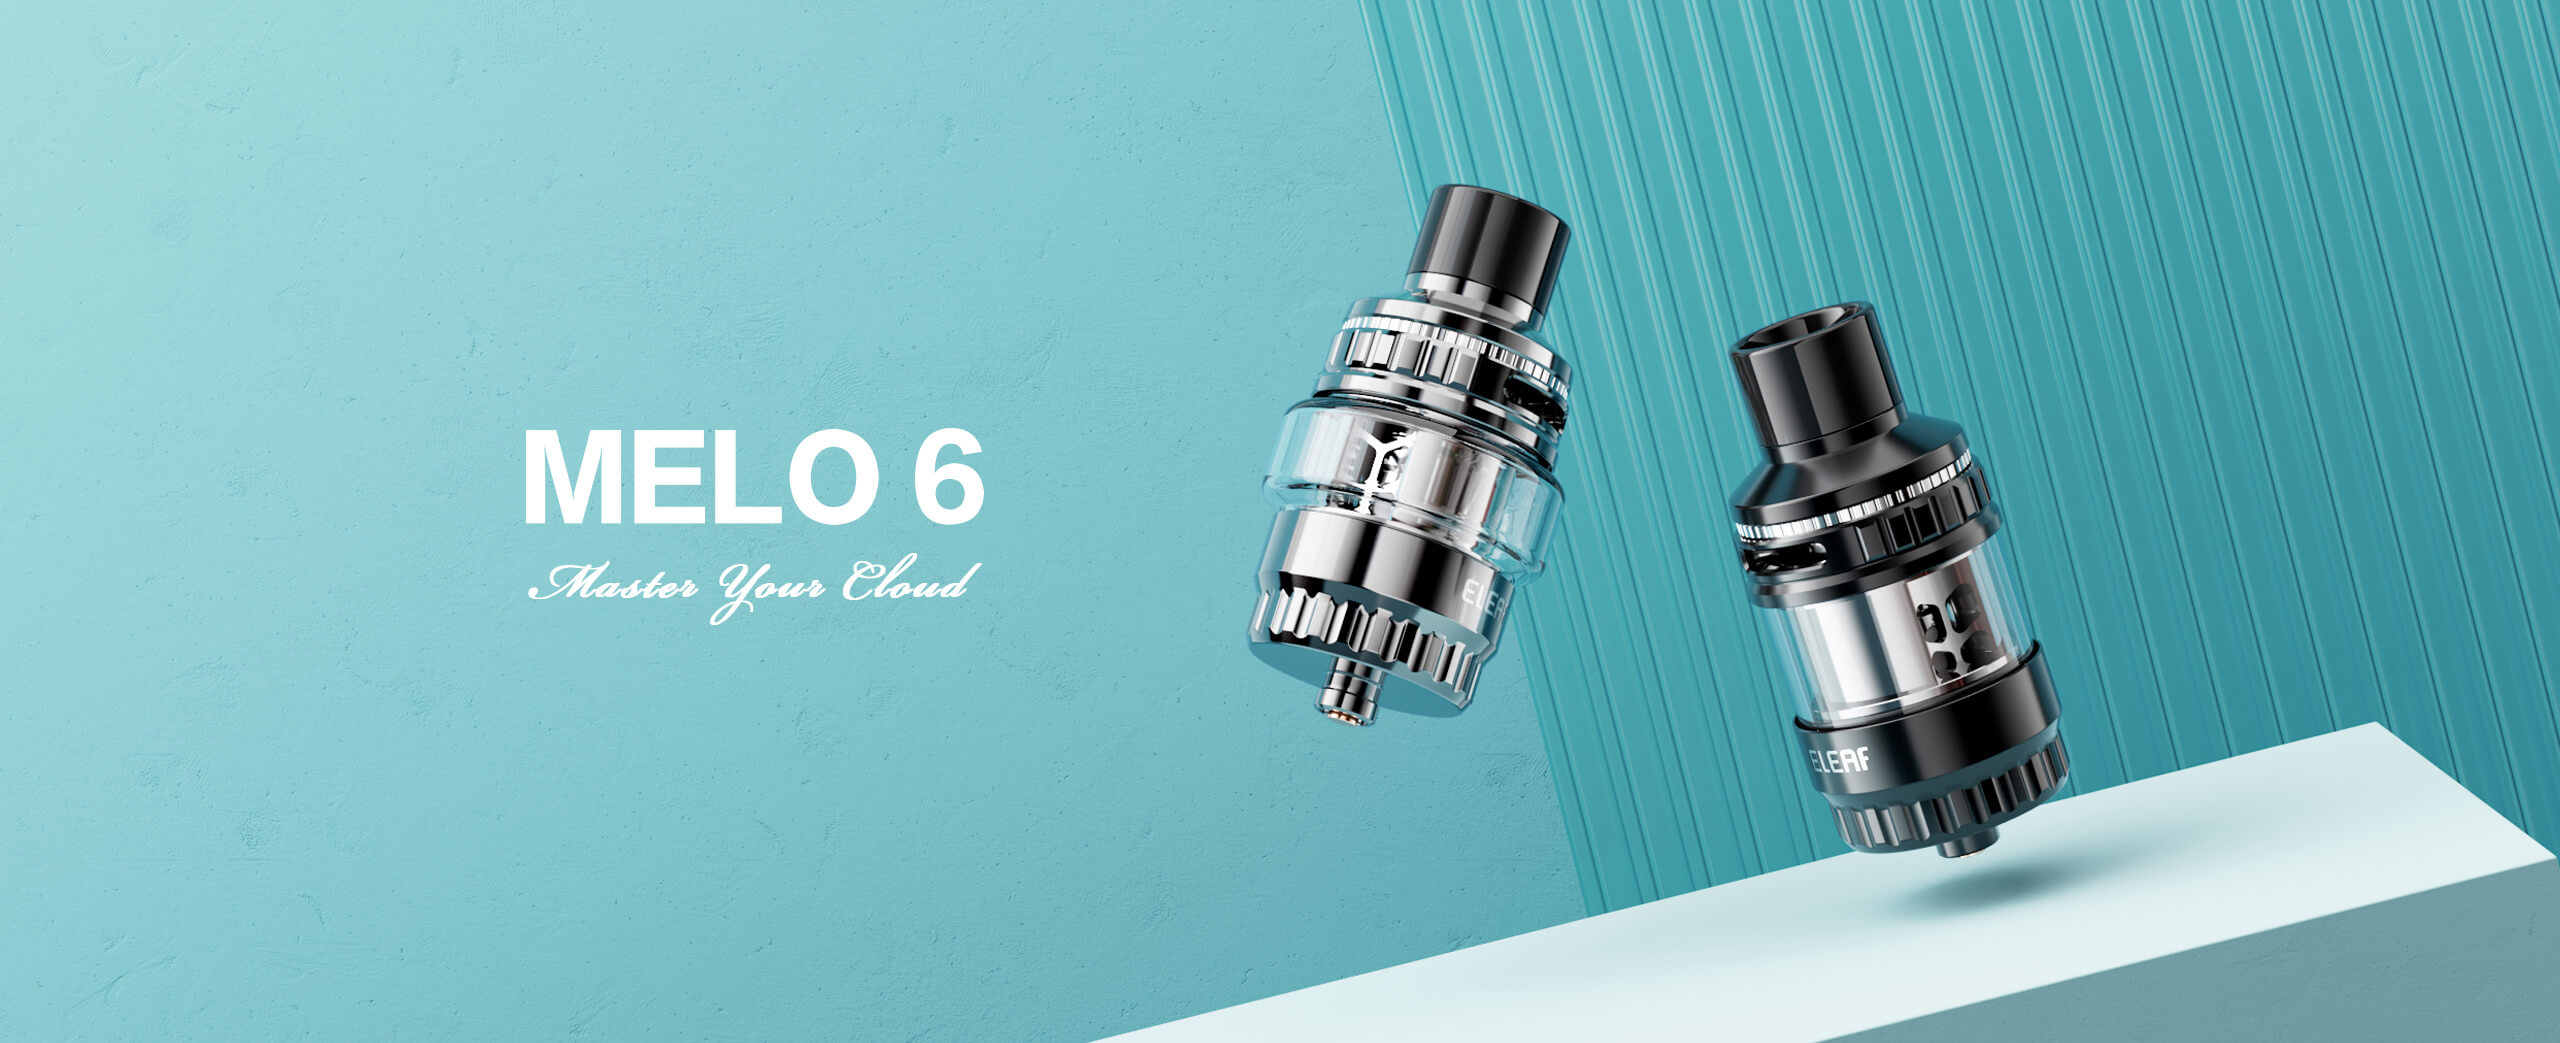 Eleaf MELO 6 Tank is designed to master your cloudy vaping experience